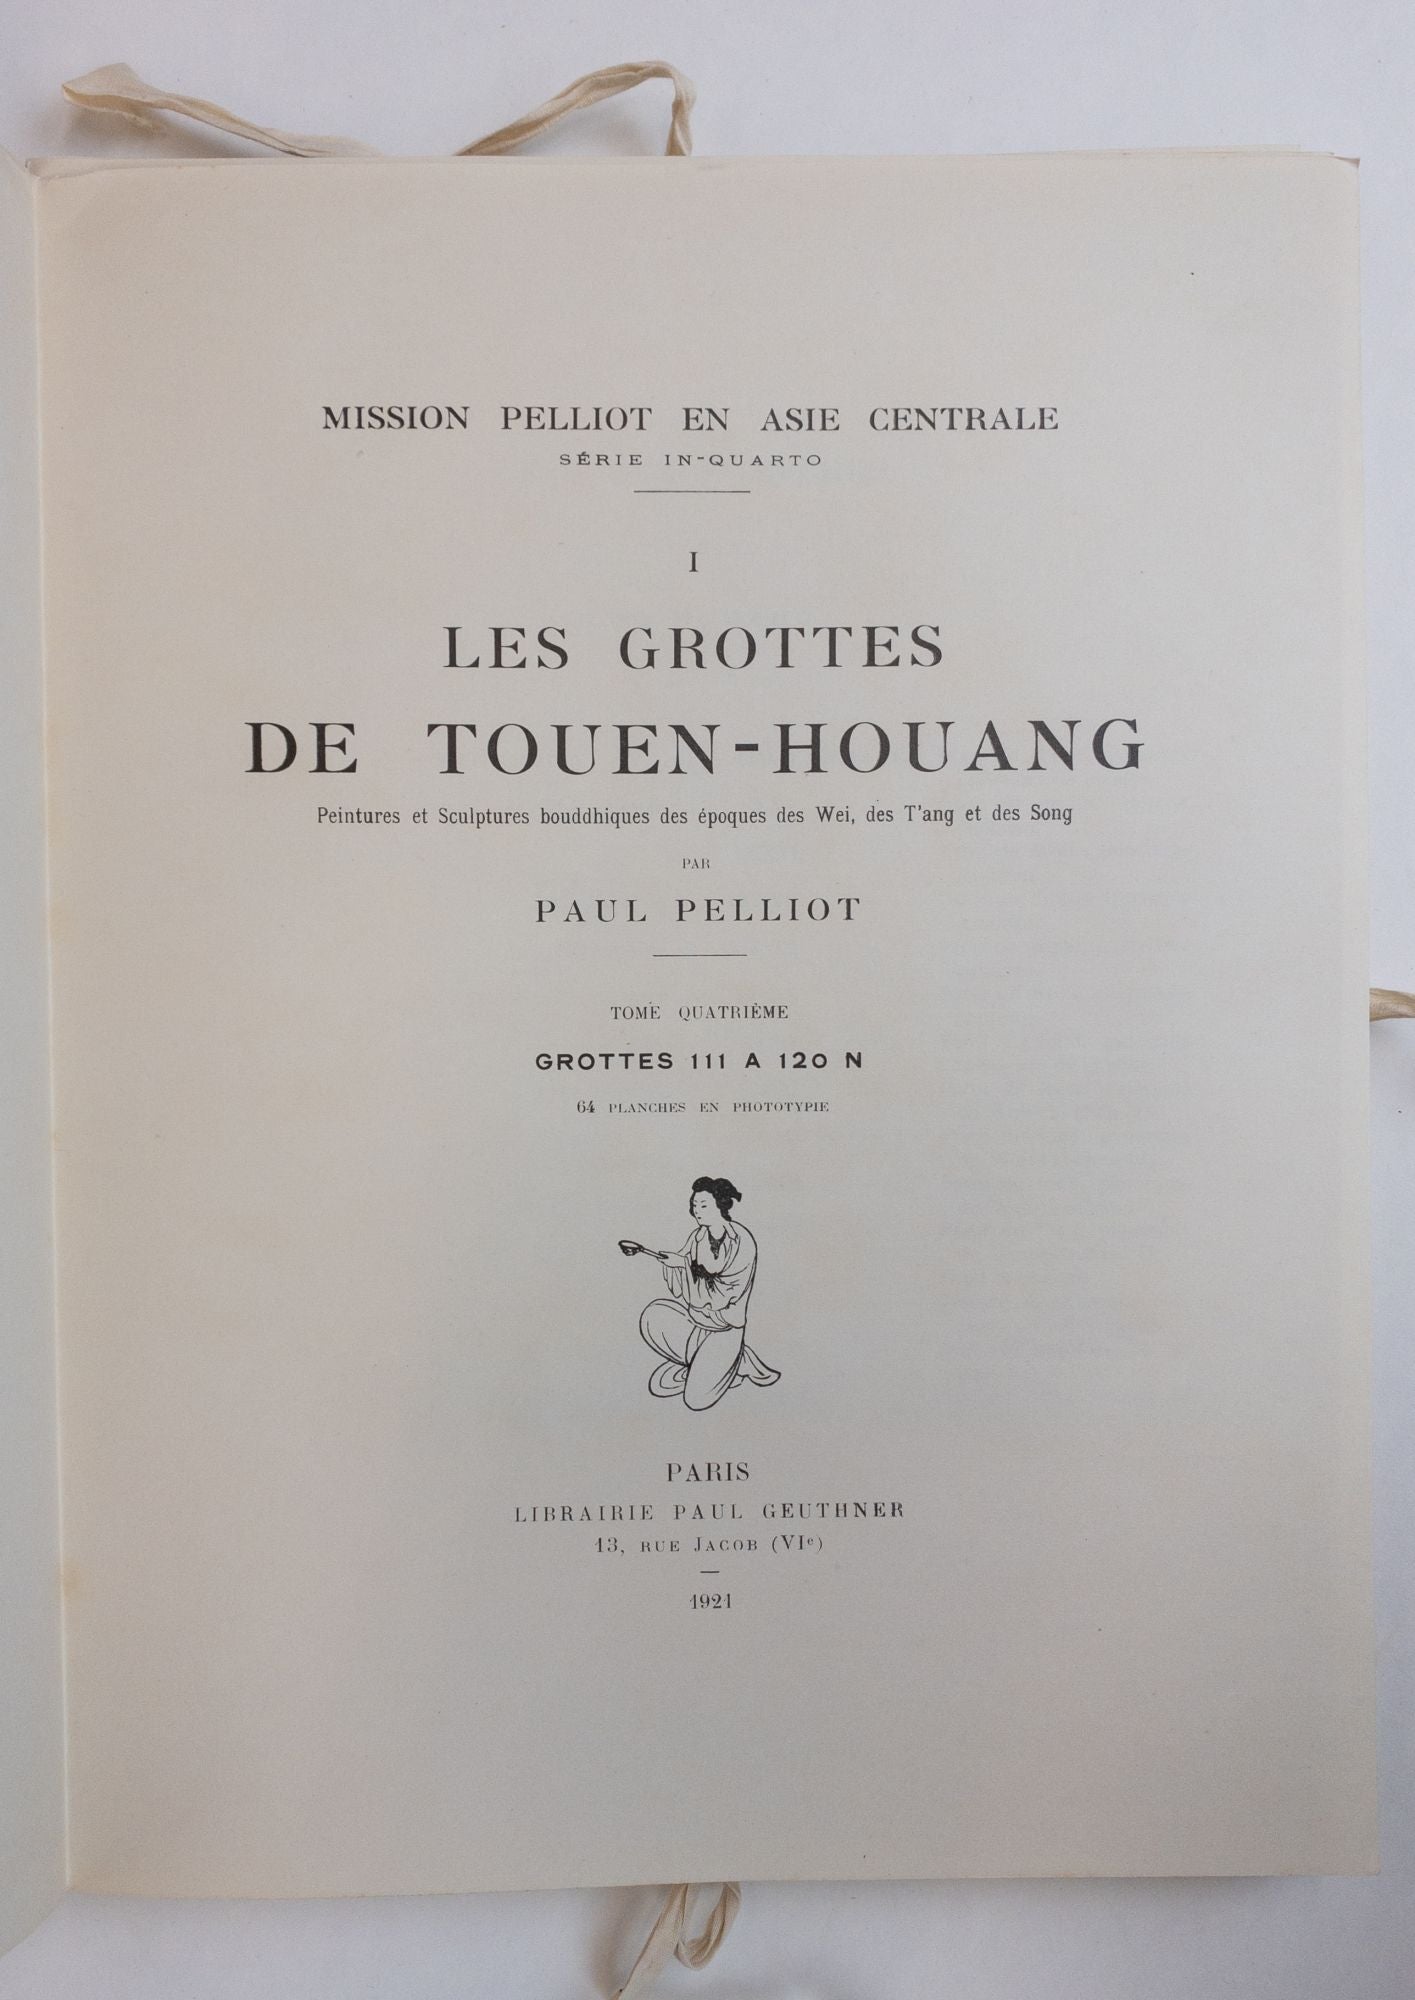 Product Image for LES GROTTES DE TOUEN-HOUANG [VOLUMES 1, 4, 5, AND 6 ONLY]